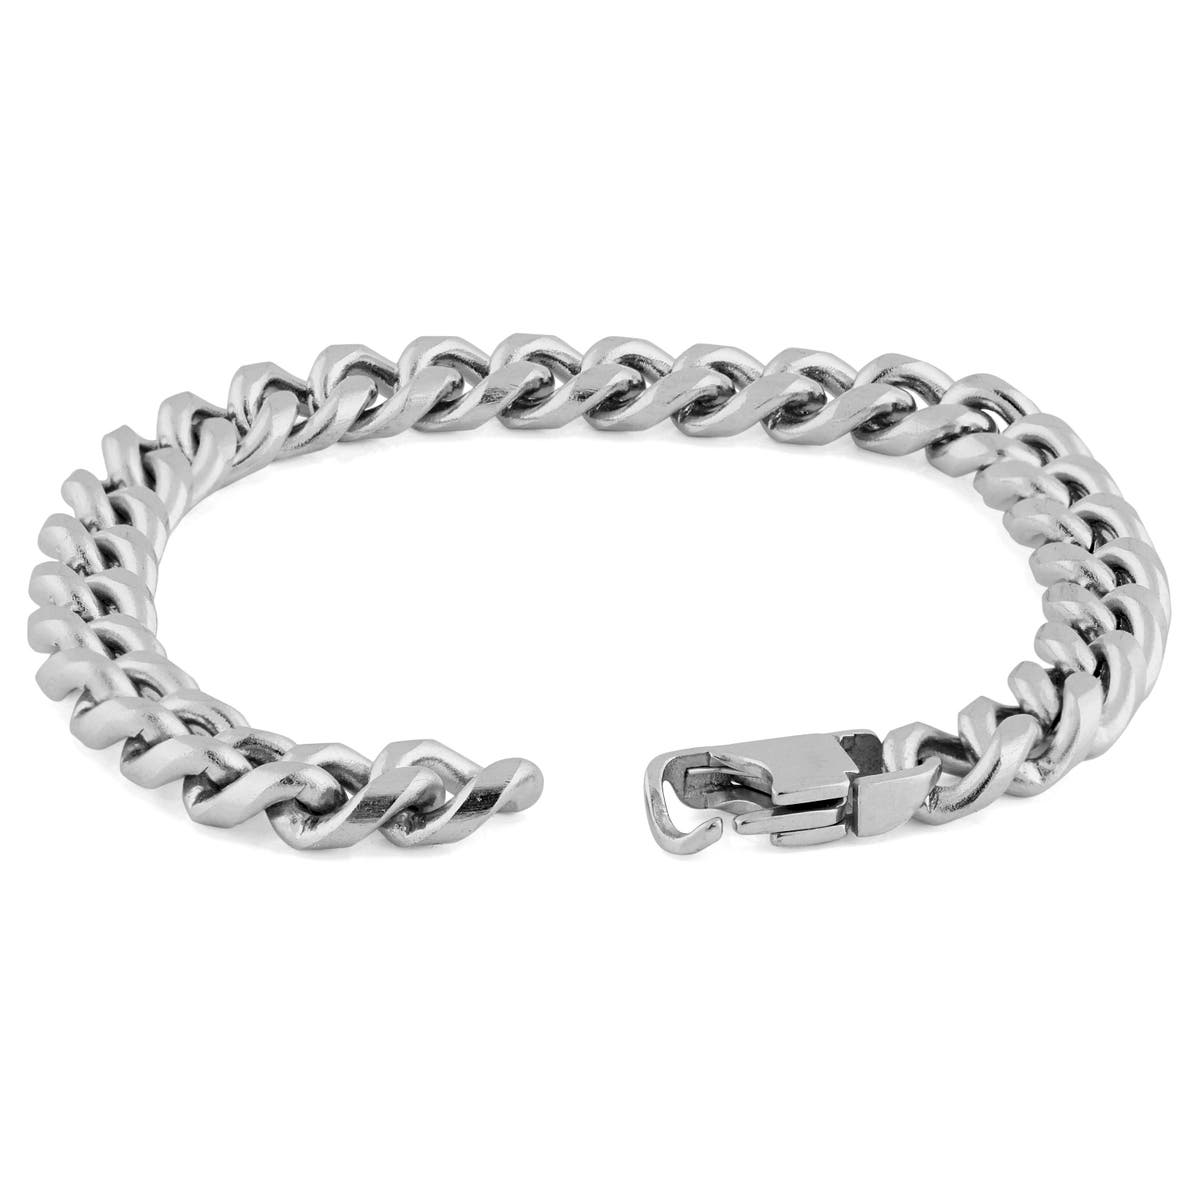 8mm Silver-Tone Stainless Steel Curb Chain Bracelet | In stock! | Lucleon